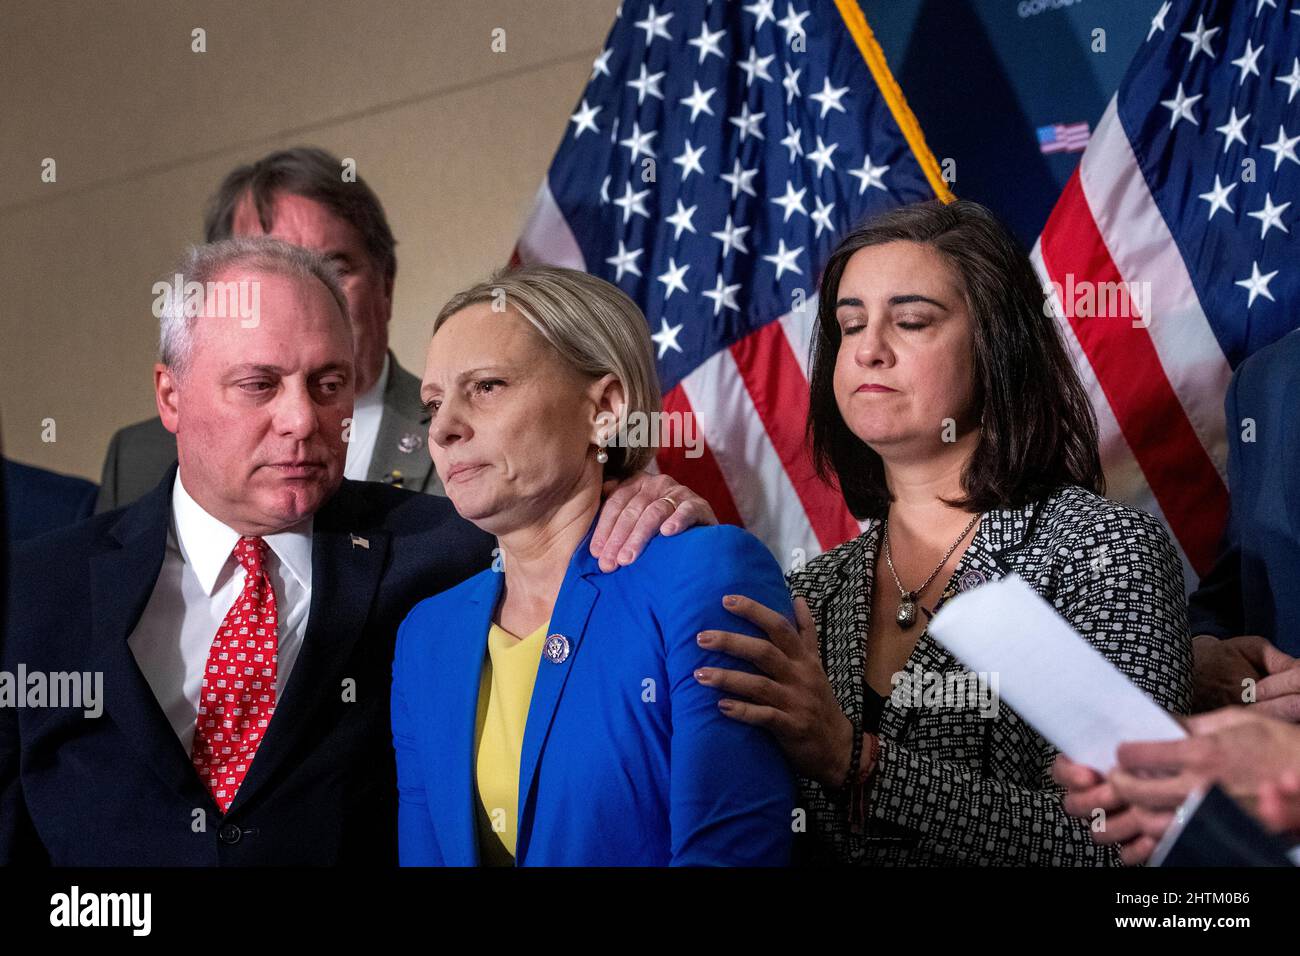 United States House Minority Whip Steve Scalise (Republican of Louisiana), left, and United States Representative Nicole Malliotakis (Republican of New York), right, comfort United States Representative Victoria Spartz (Republican of Indiana), center, following her emotional remarks on the current situation in her home country of Ukraine, as GOP House leadership offers remarks on United States President Joe Biden's upcoming State of the Union Address, in the Rayburn House Office Building in Washington, DC, Tuesday, March 1, 2022. Rep. Spartz was born in Nosivka, Ukraine. Credit: Rod Lamkey/C Stock Photo